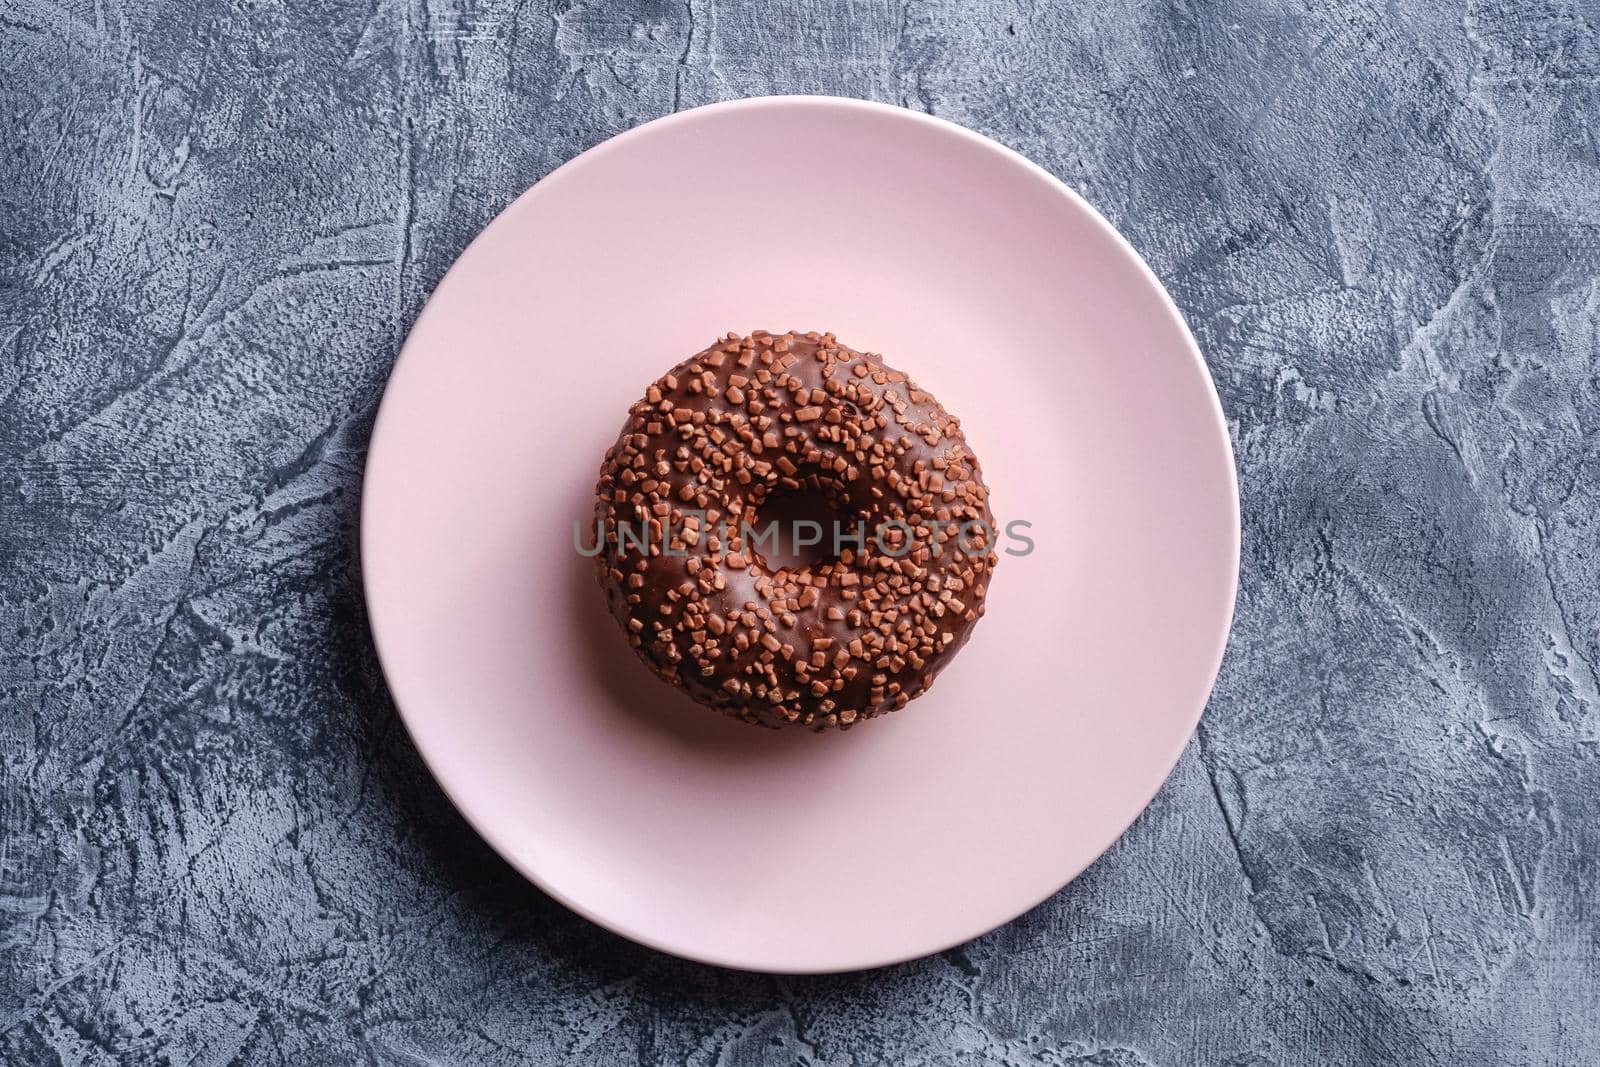 Chocolate donut with sprinkles on pink plate, sweet glazed dessert food on concrete textured background, top view